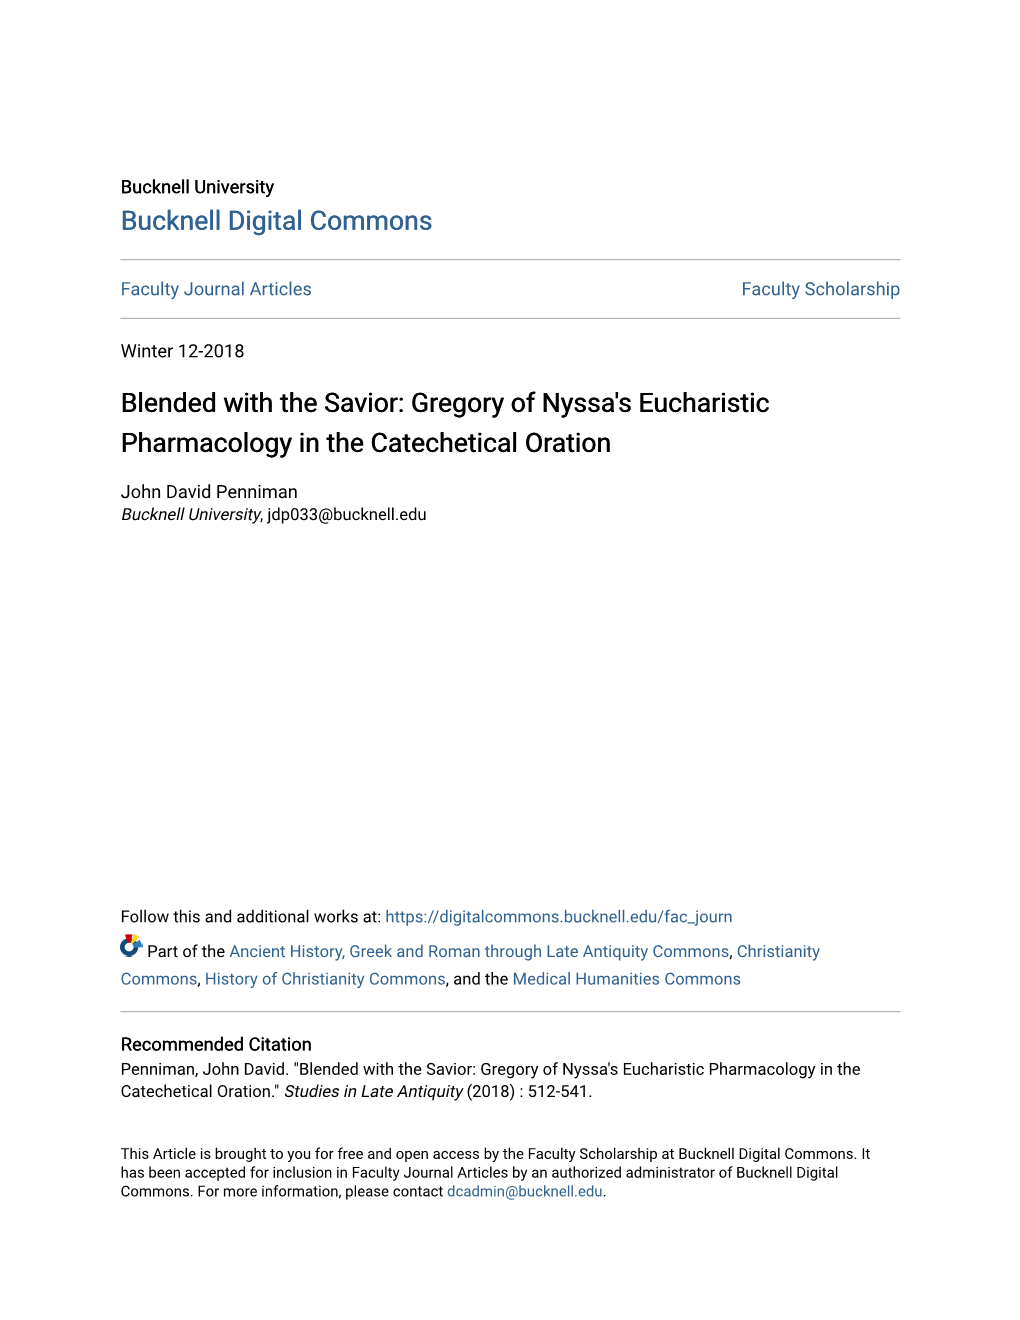 Blended with the Savior: Gregory of Nyssa's Eucharistic Pharmacology in the Catechetical Oration